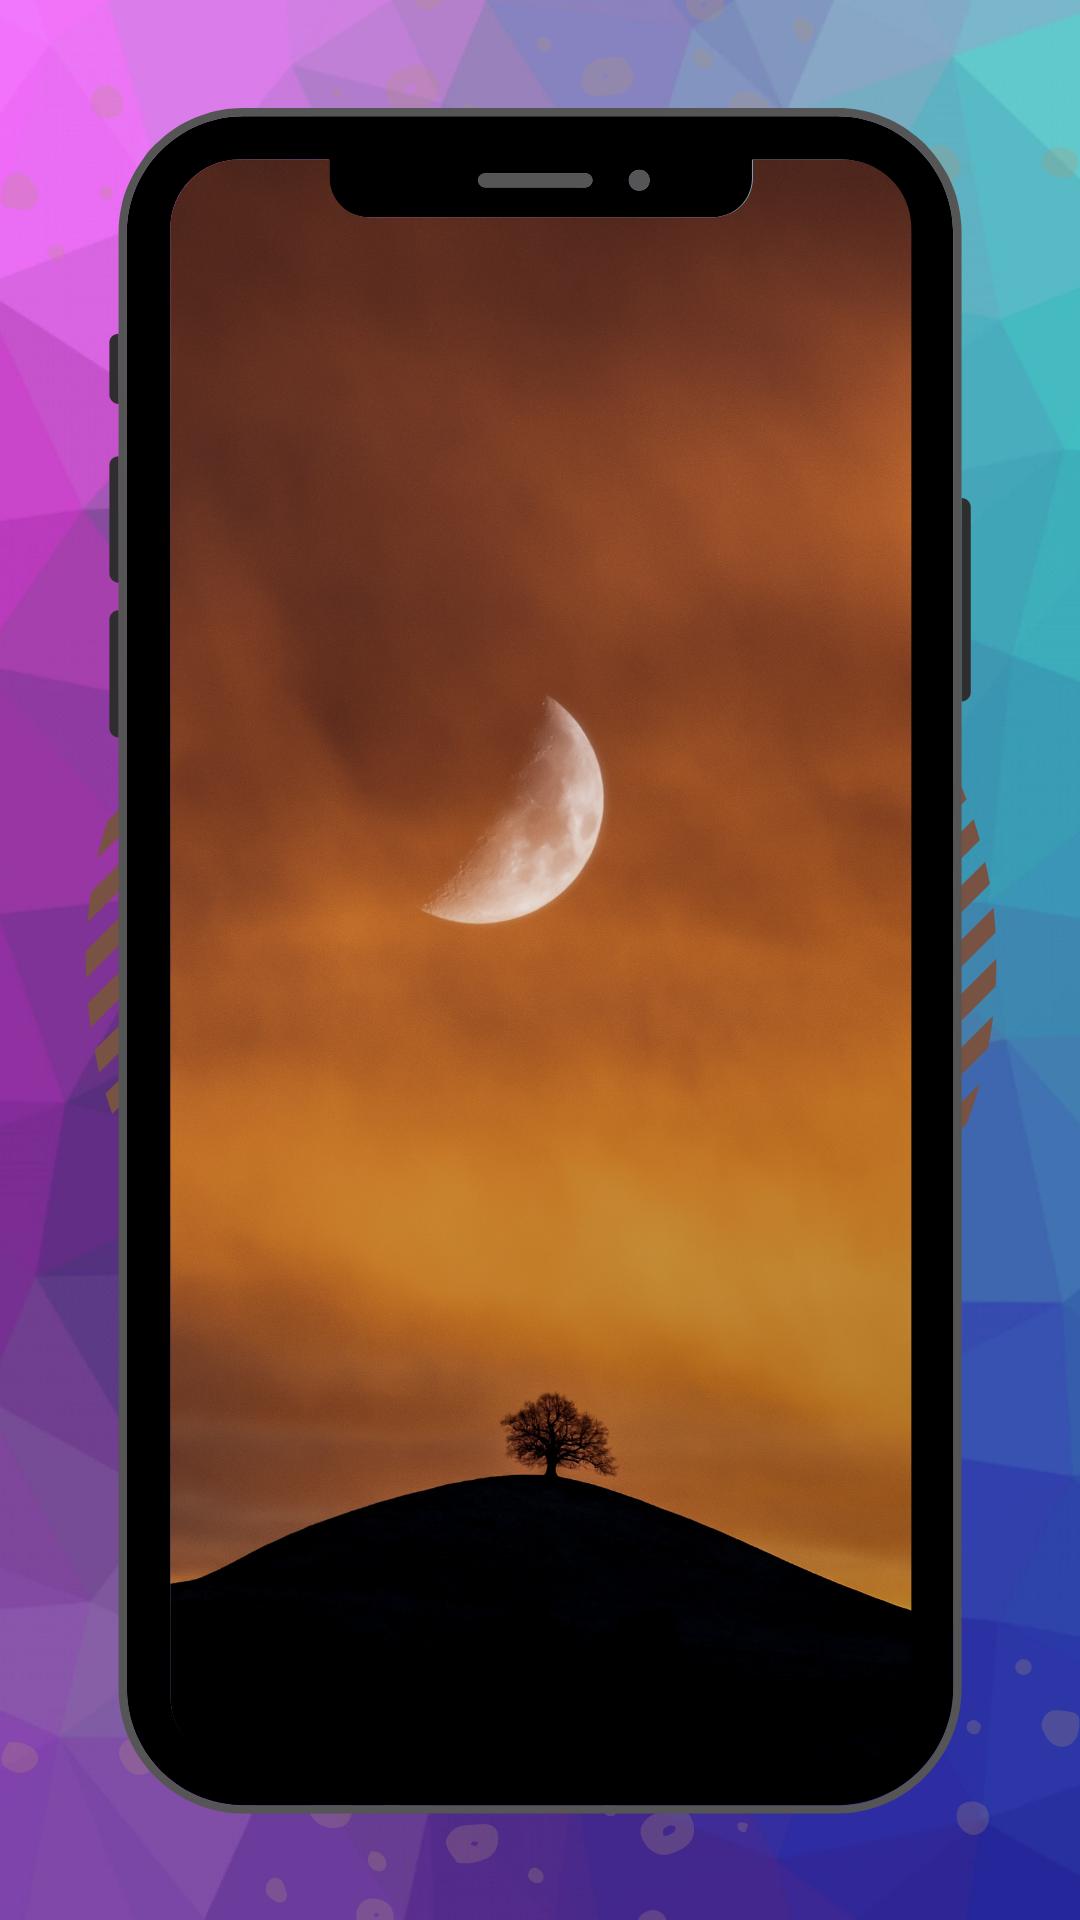 Moon Wallpapers | Badr and Hilal for Android - APK Download